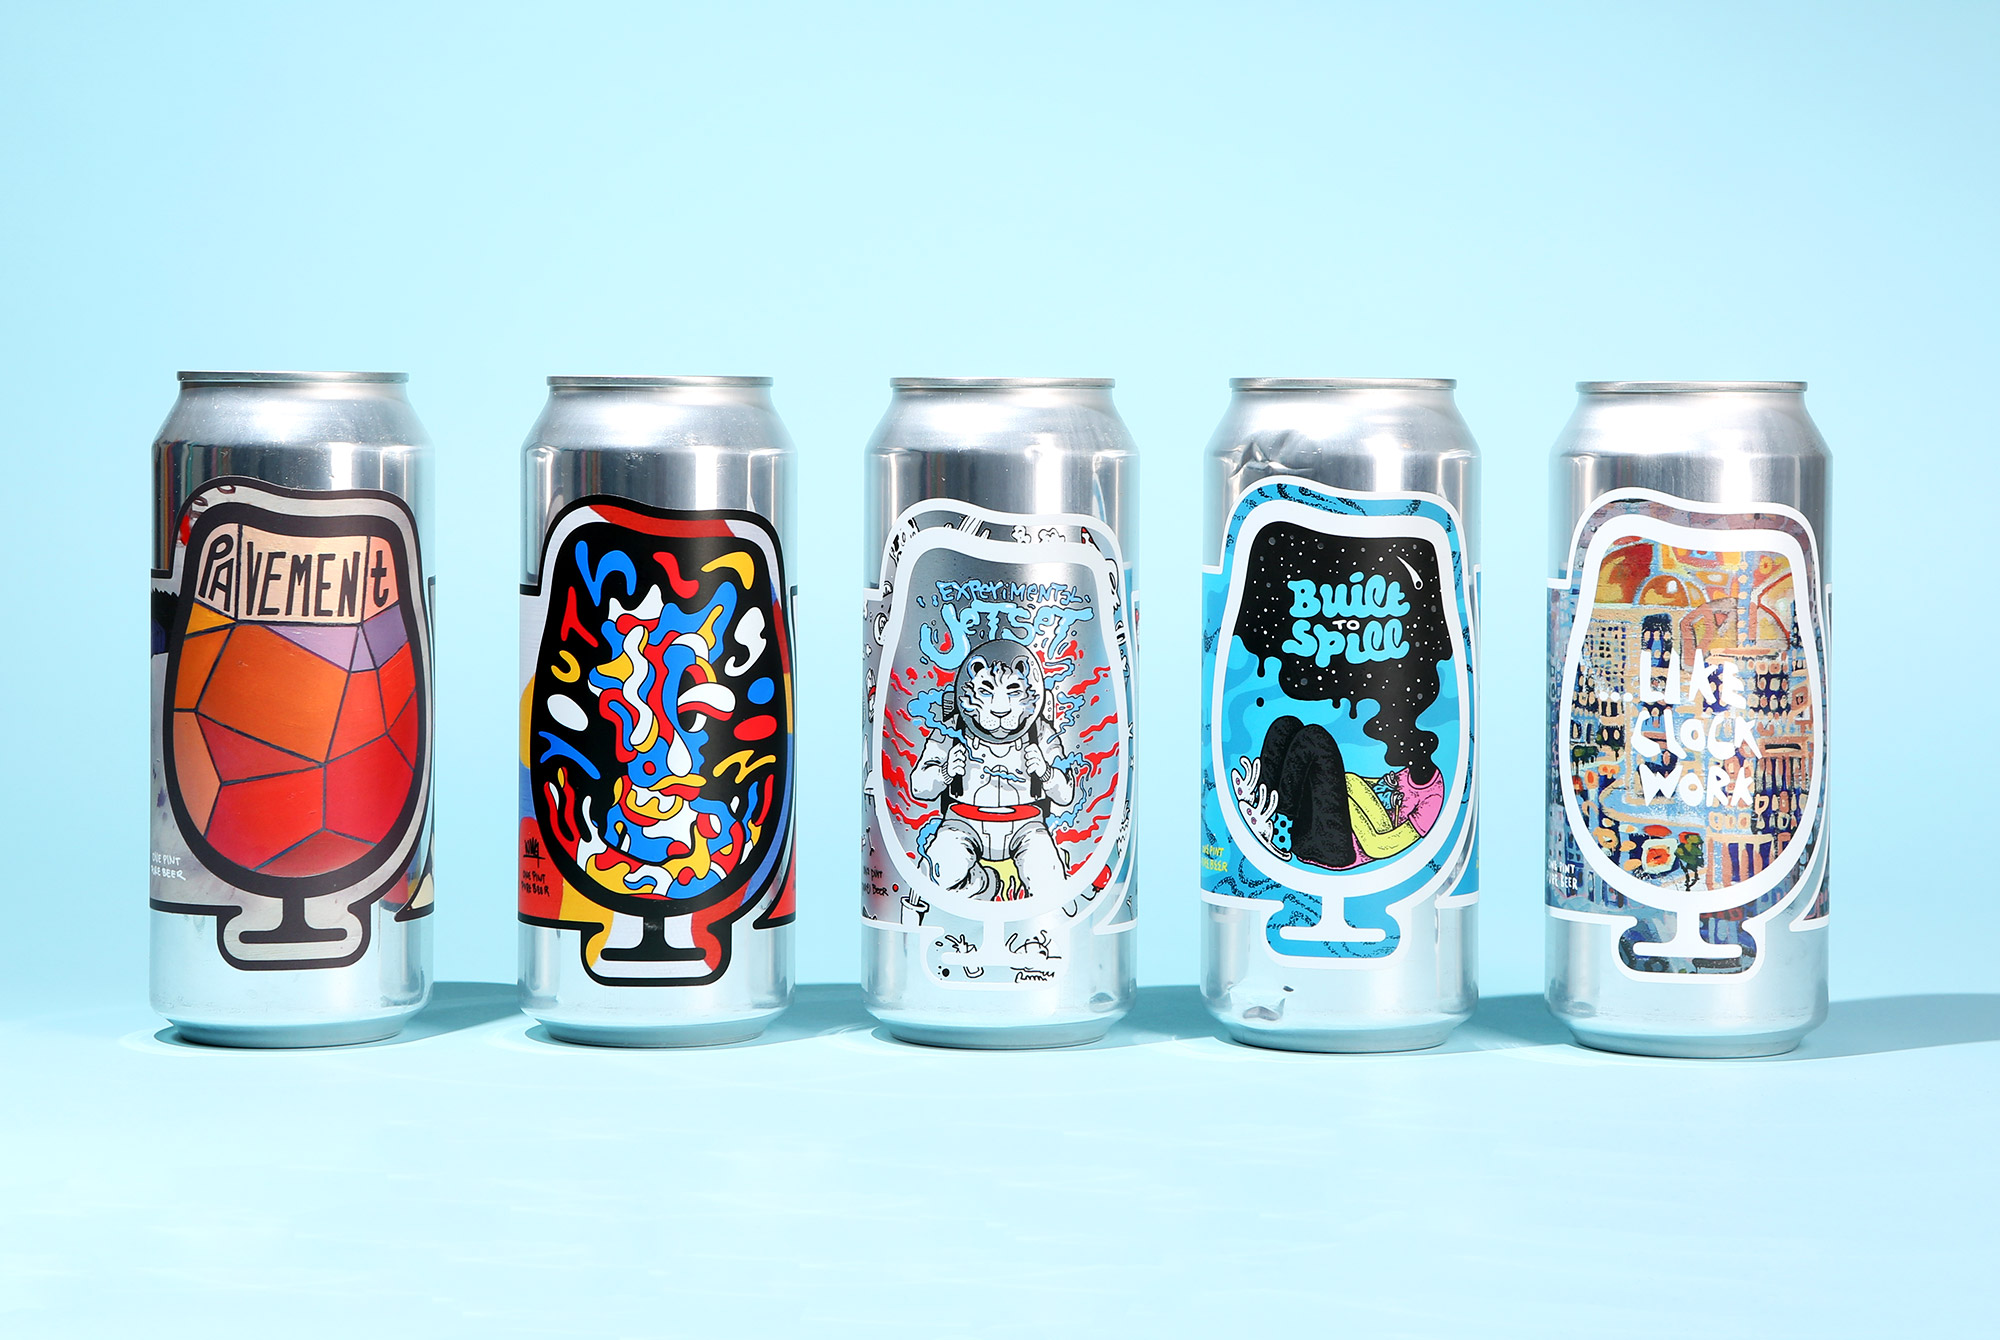 5 Questions with the Artists Behind Foam’s Gorgeous Can Art